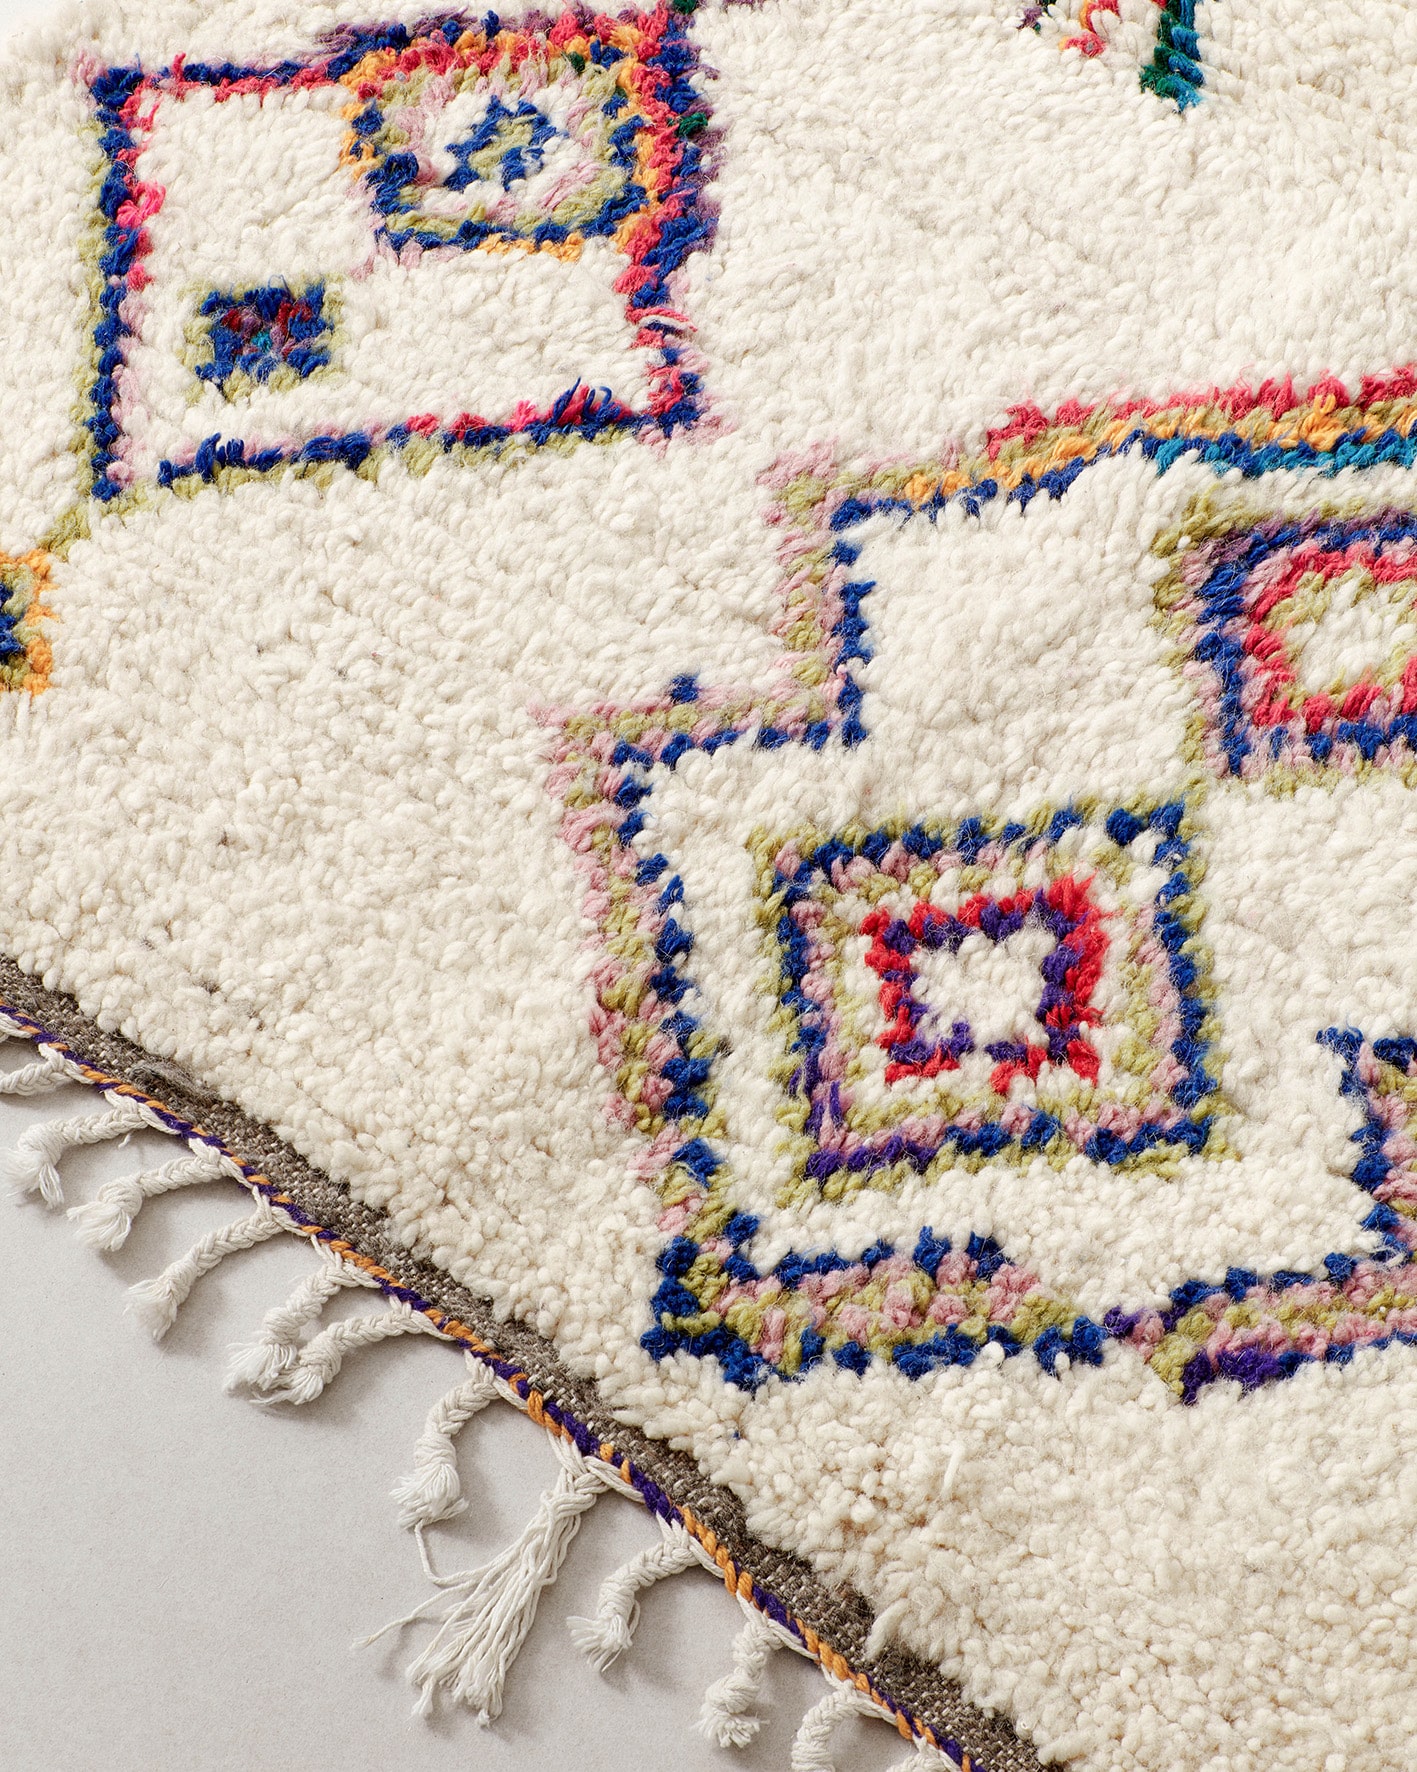 Small rug with colourful line drawings, close